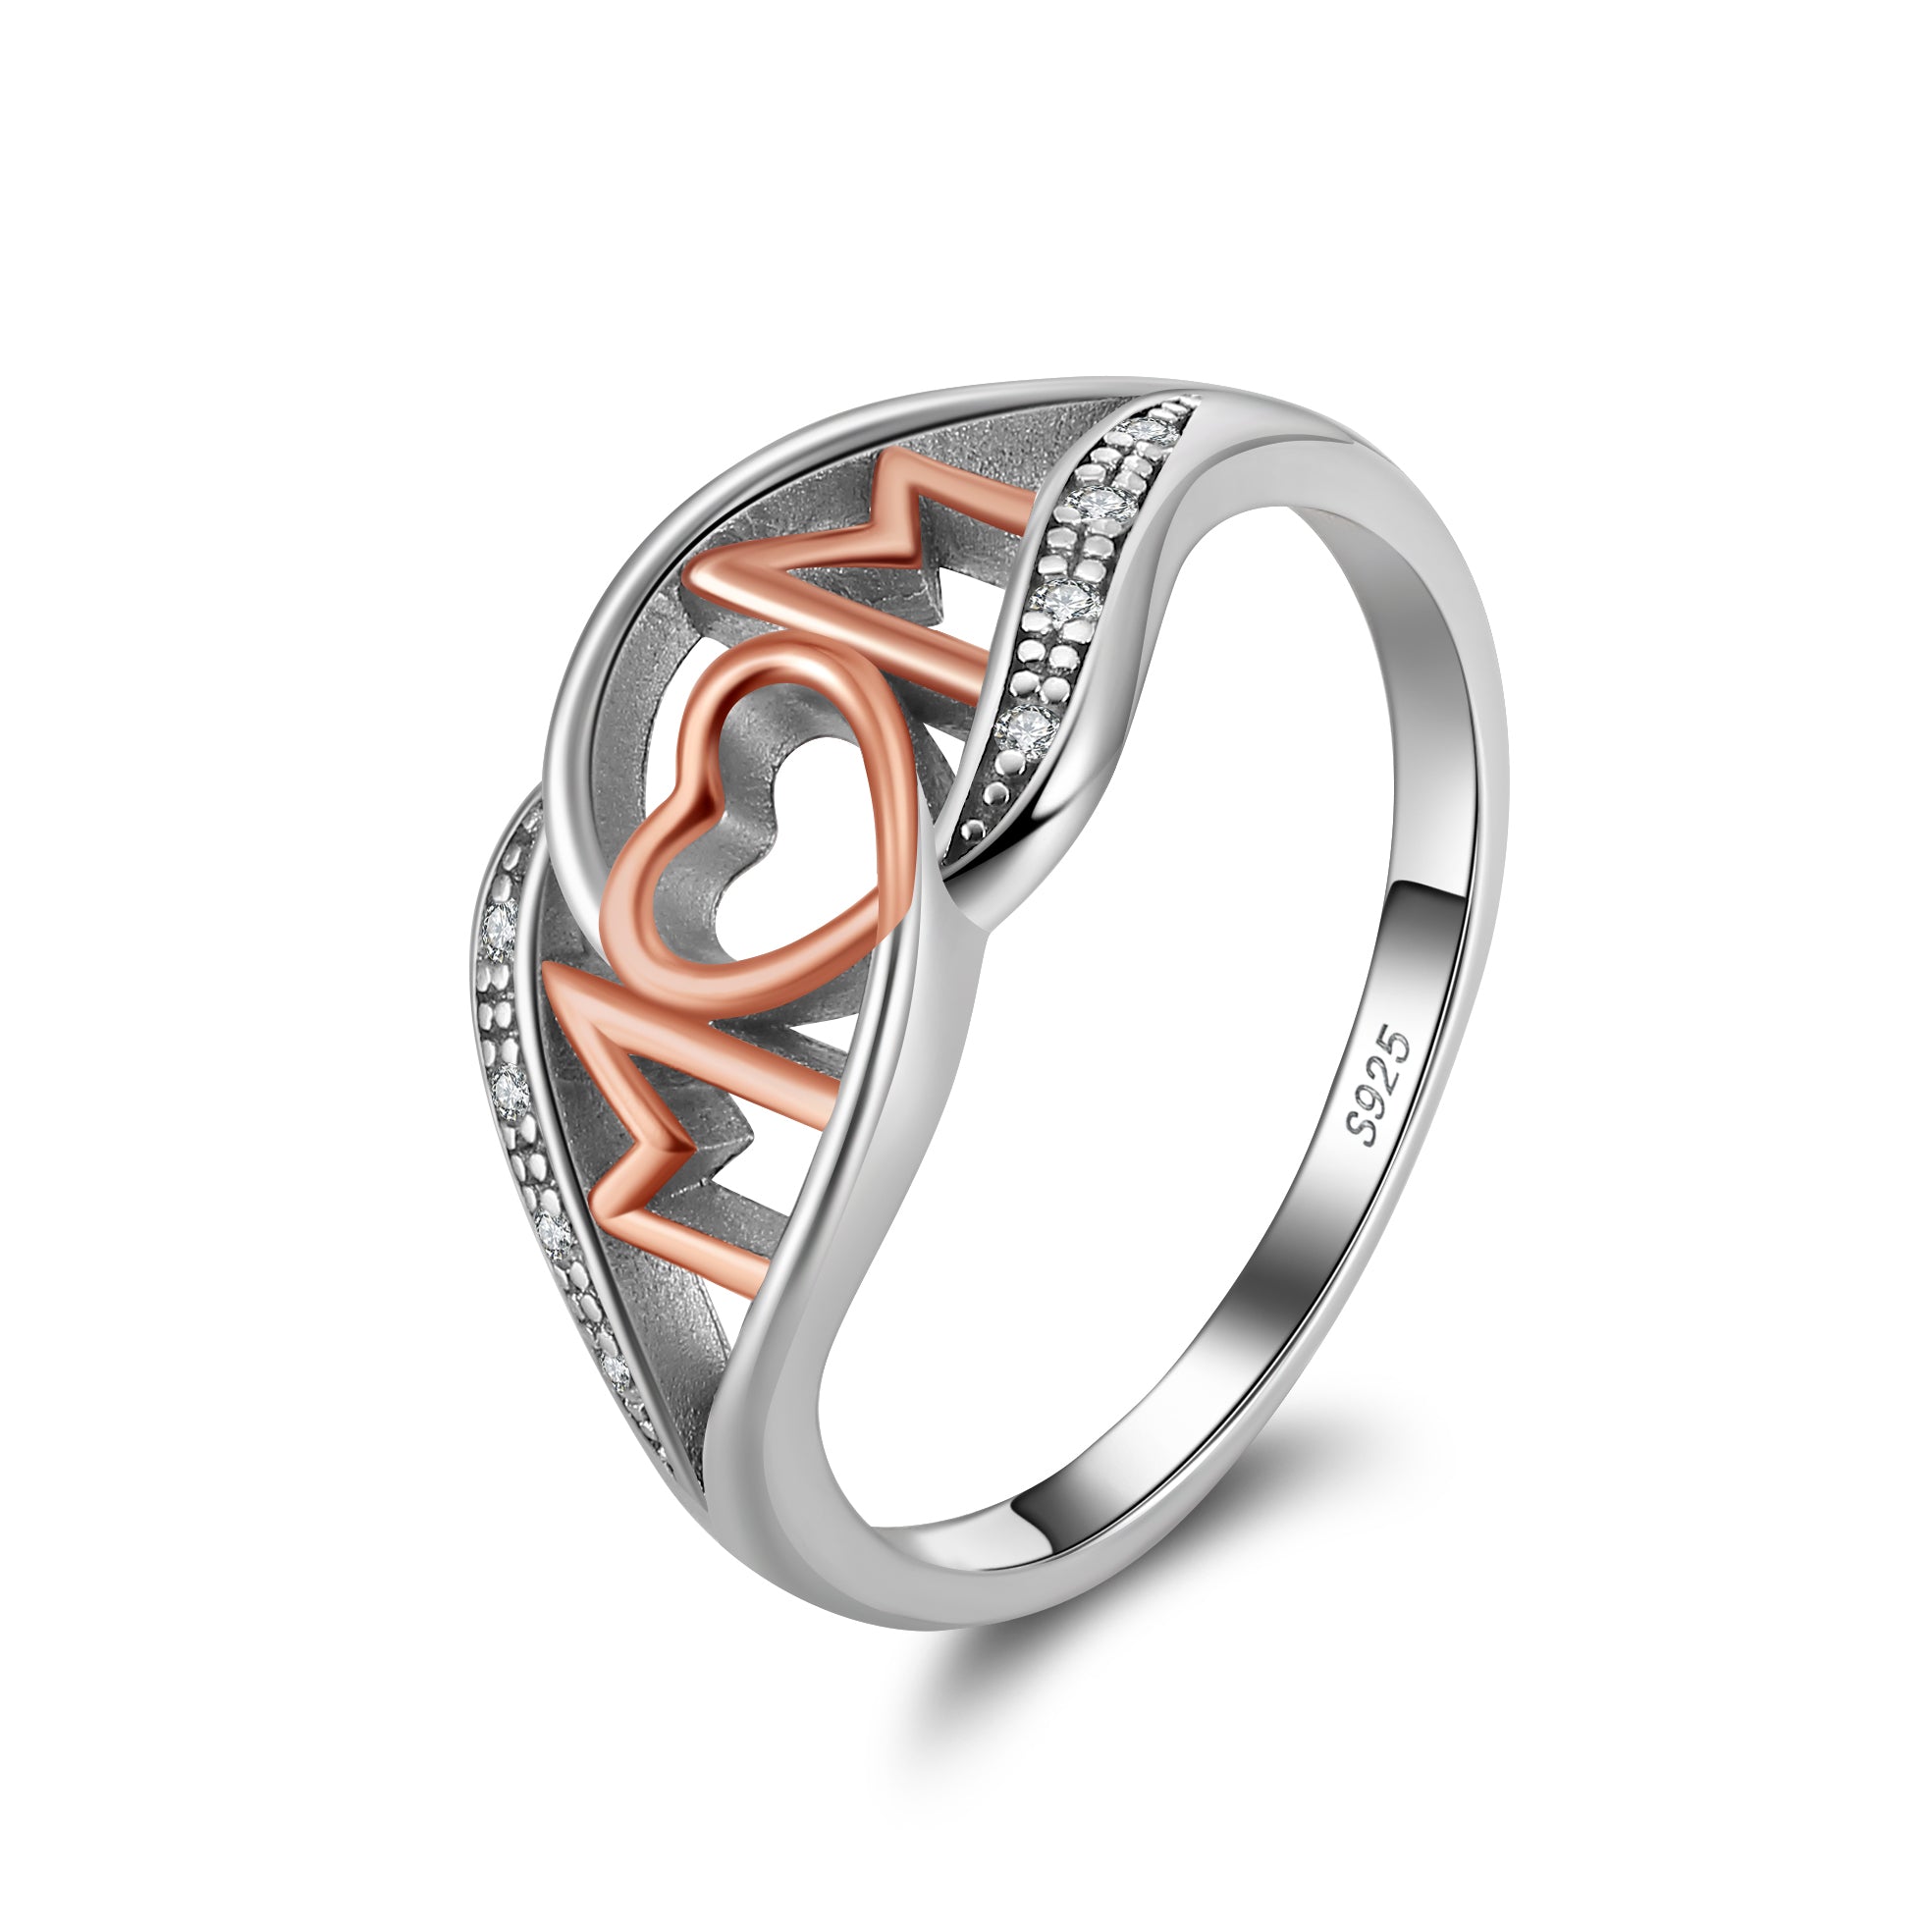 Mom Heart Ring White and Rose Gold Sterling Silver Womens Ginger Lyne Collection